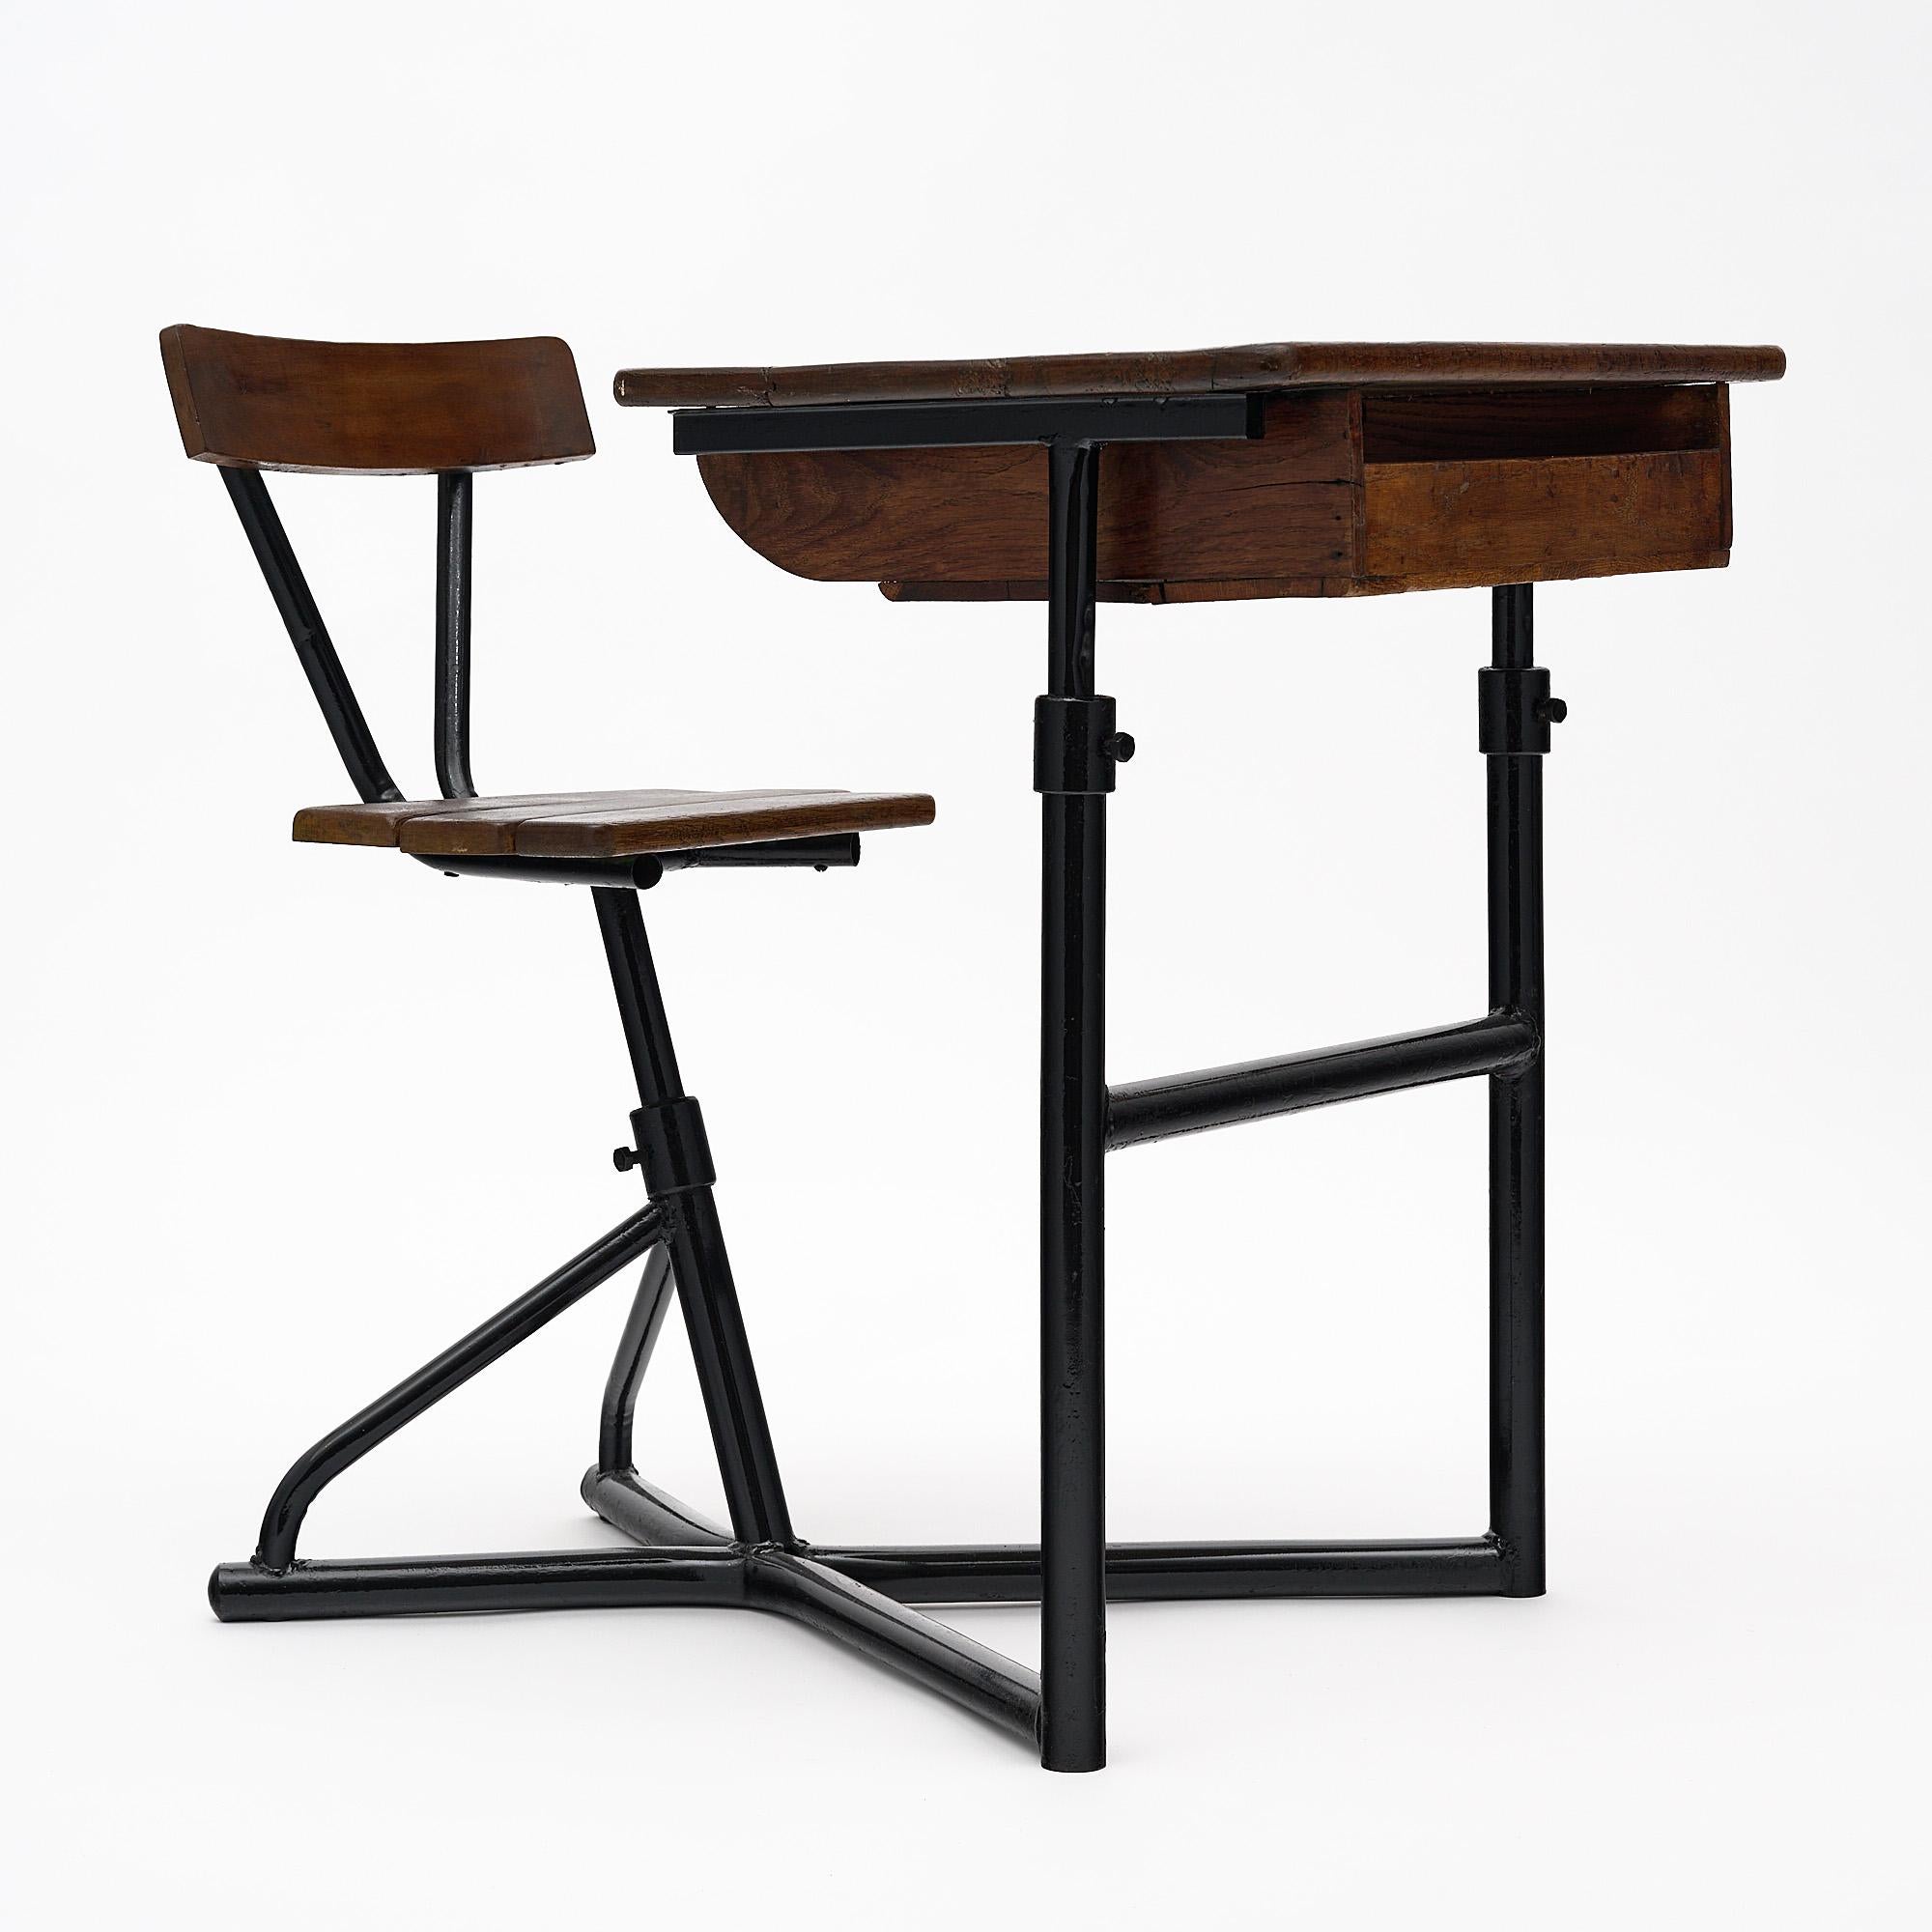 Mid-Century Modern French school desk, featuring a black laquered steel structure supporting both a wooden adjustable chair and a wooden adjustable desk with a writing surface and its compartment.